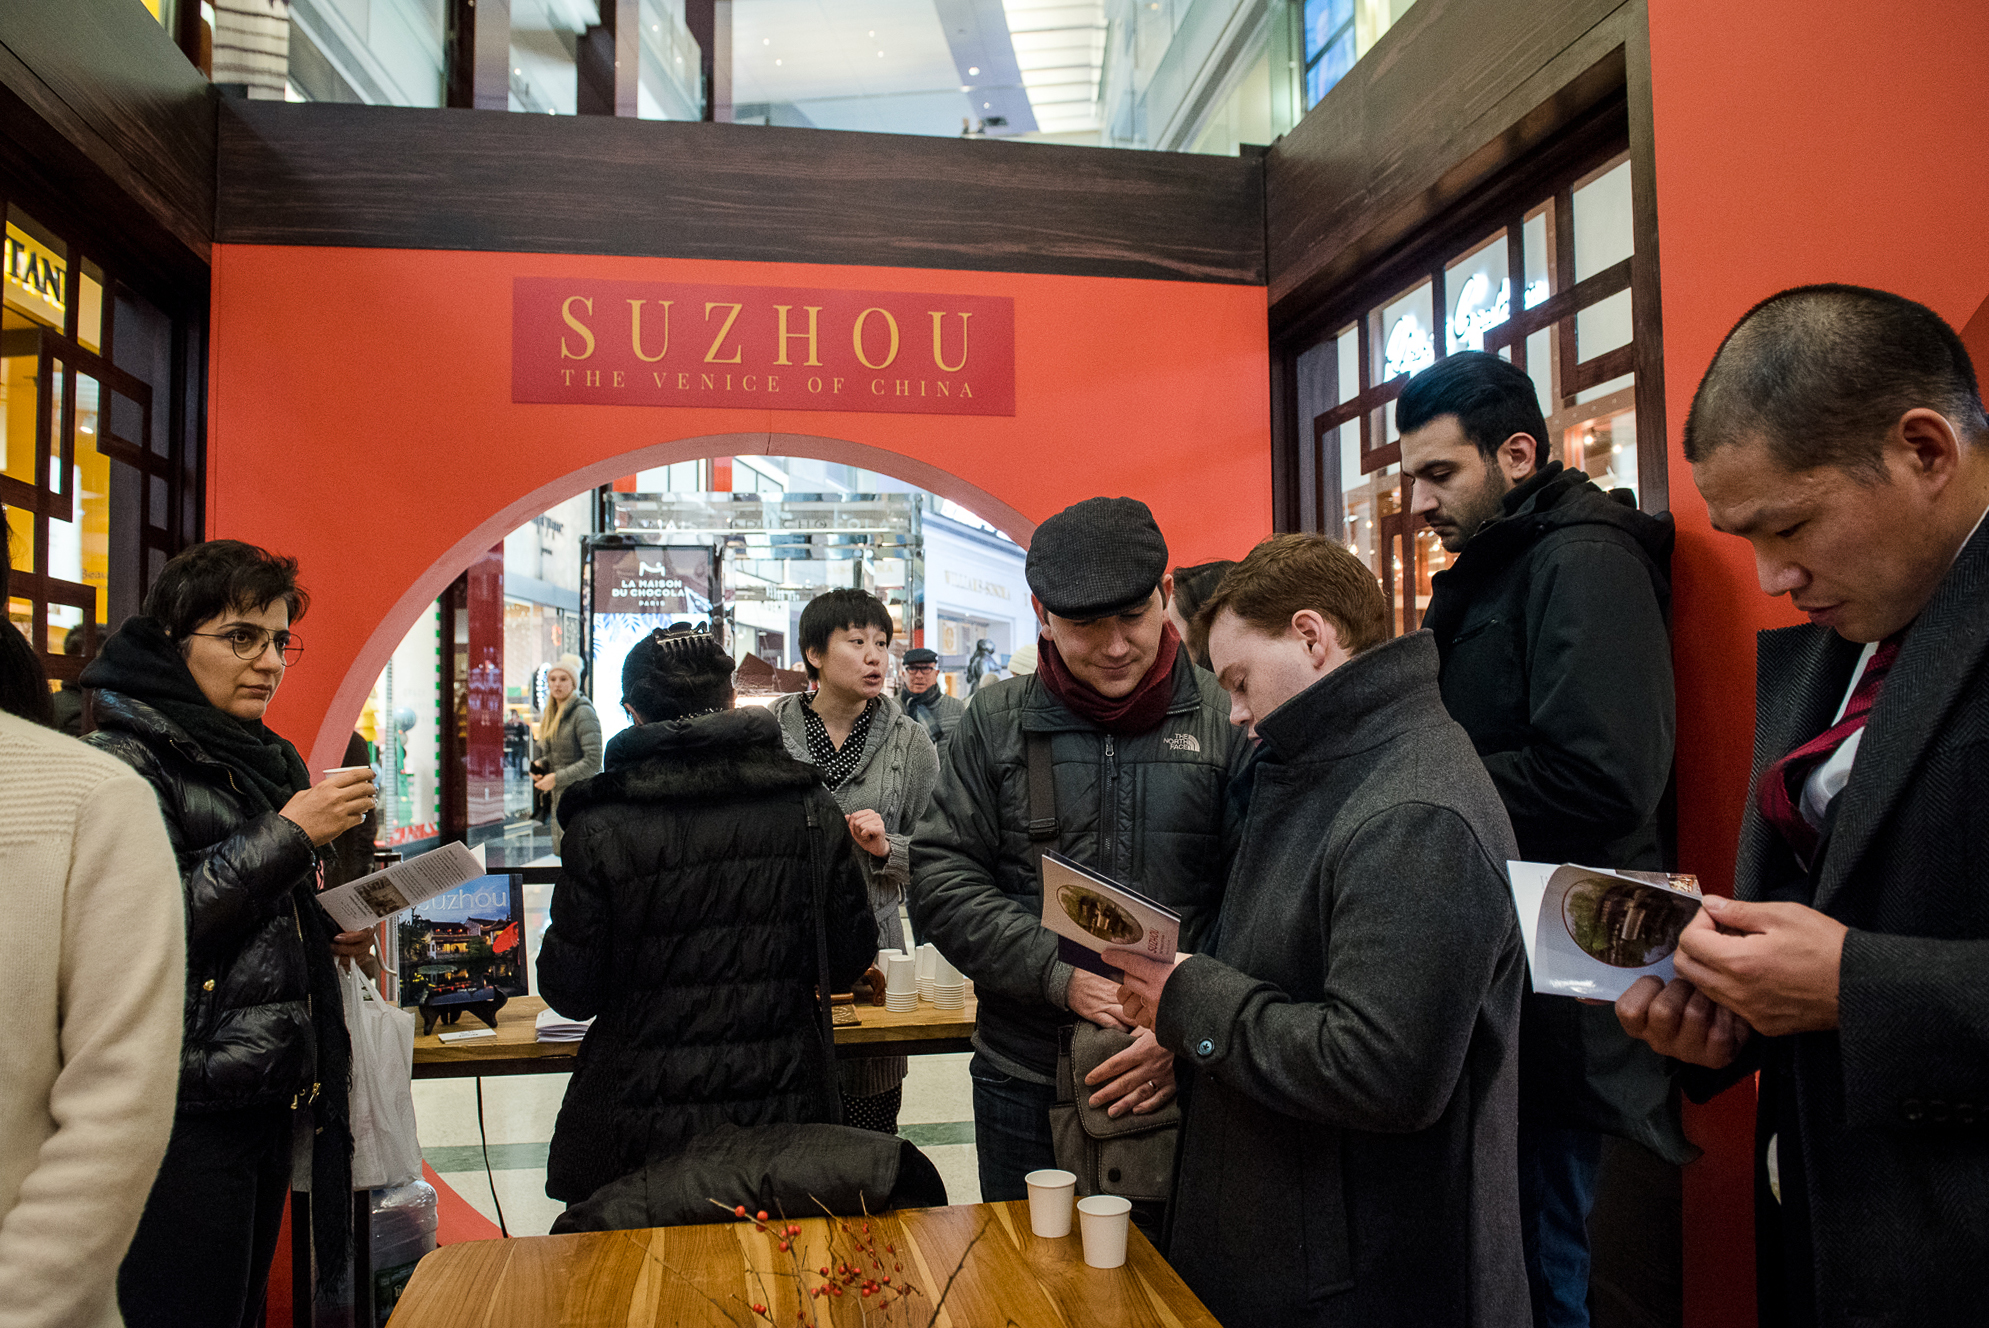 Consumers stop by to try Suzhou’s famous Biluochun Tea and learn about the destination, also known as the “Venice of China”